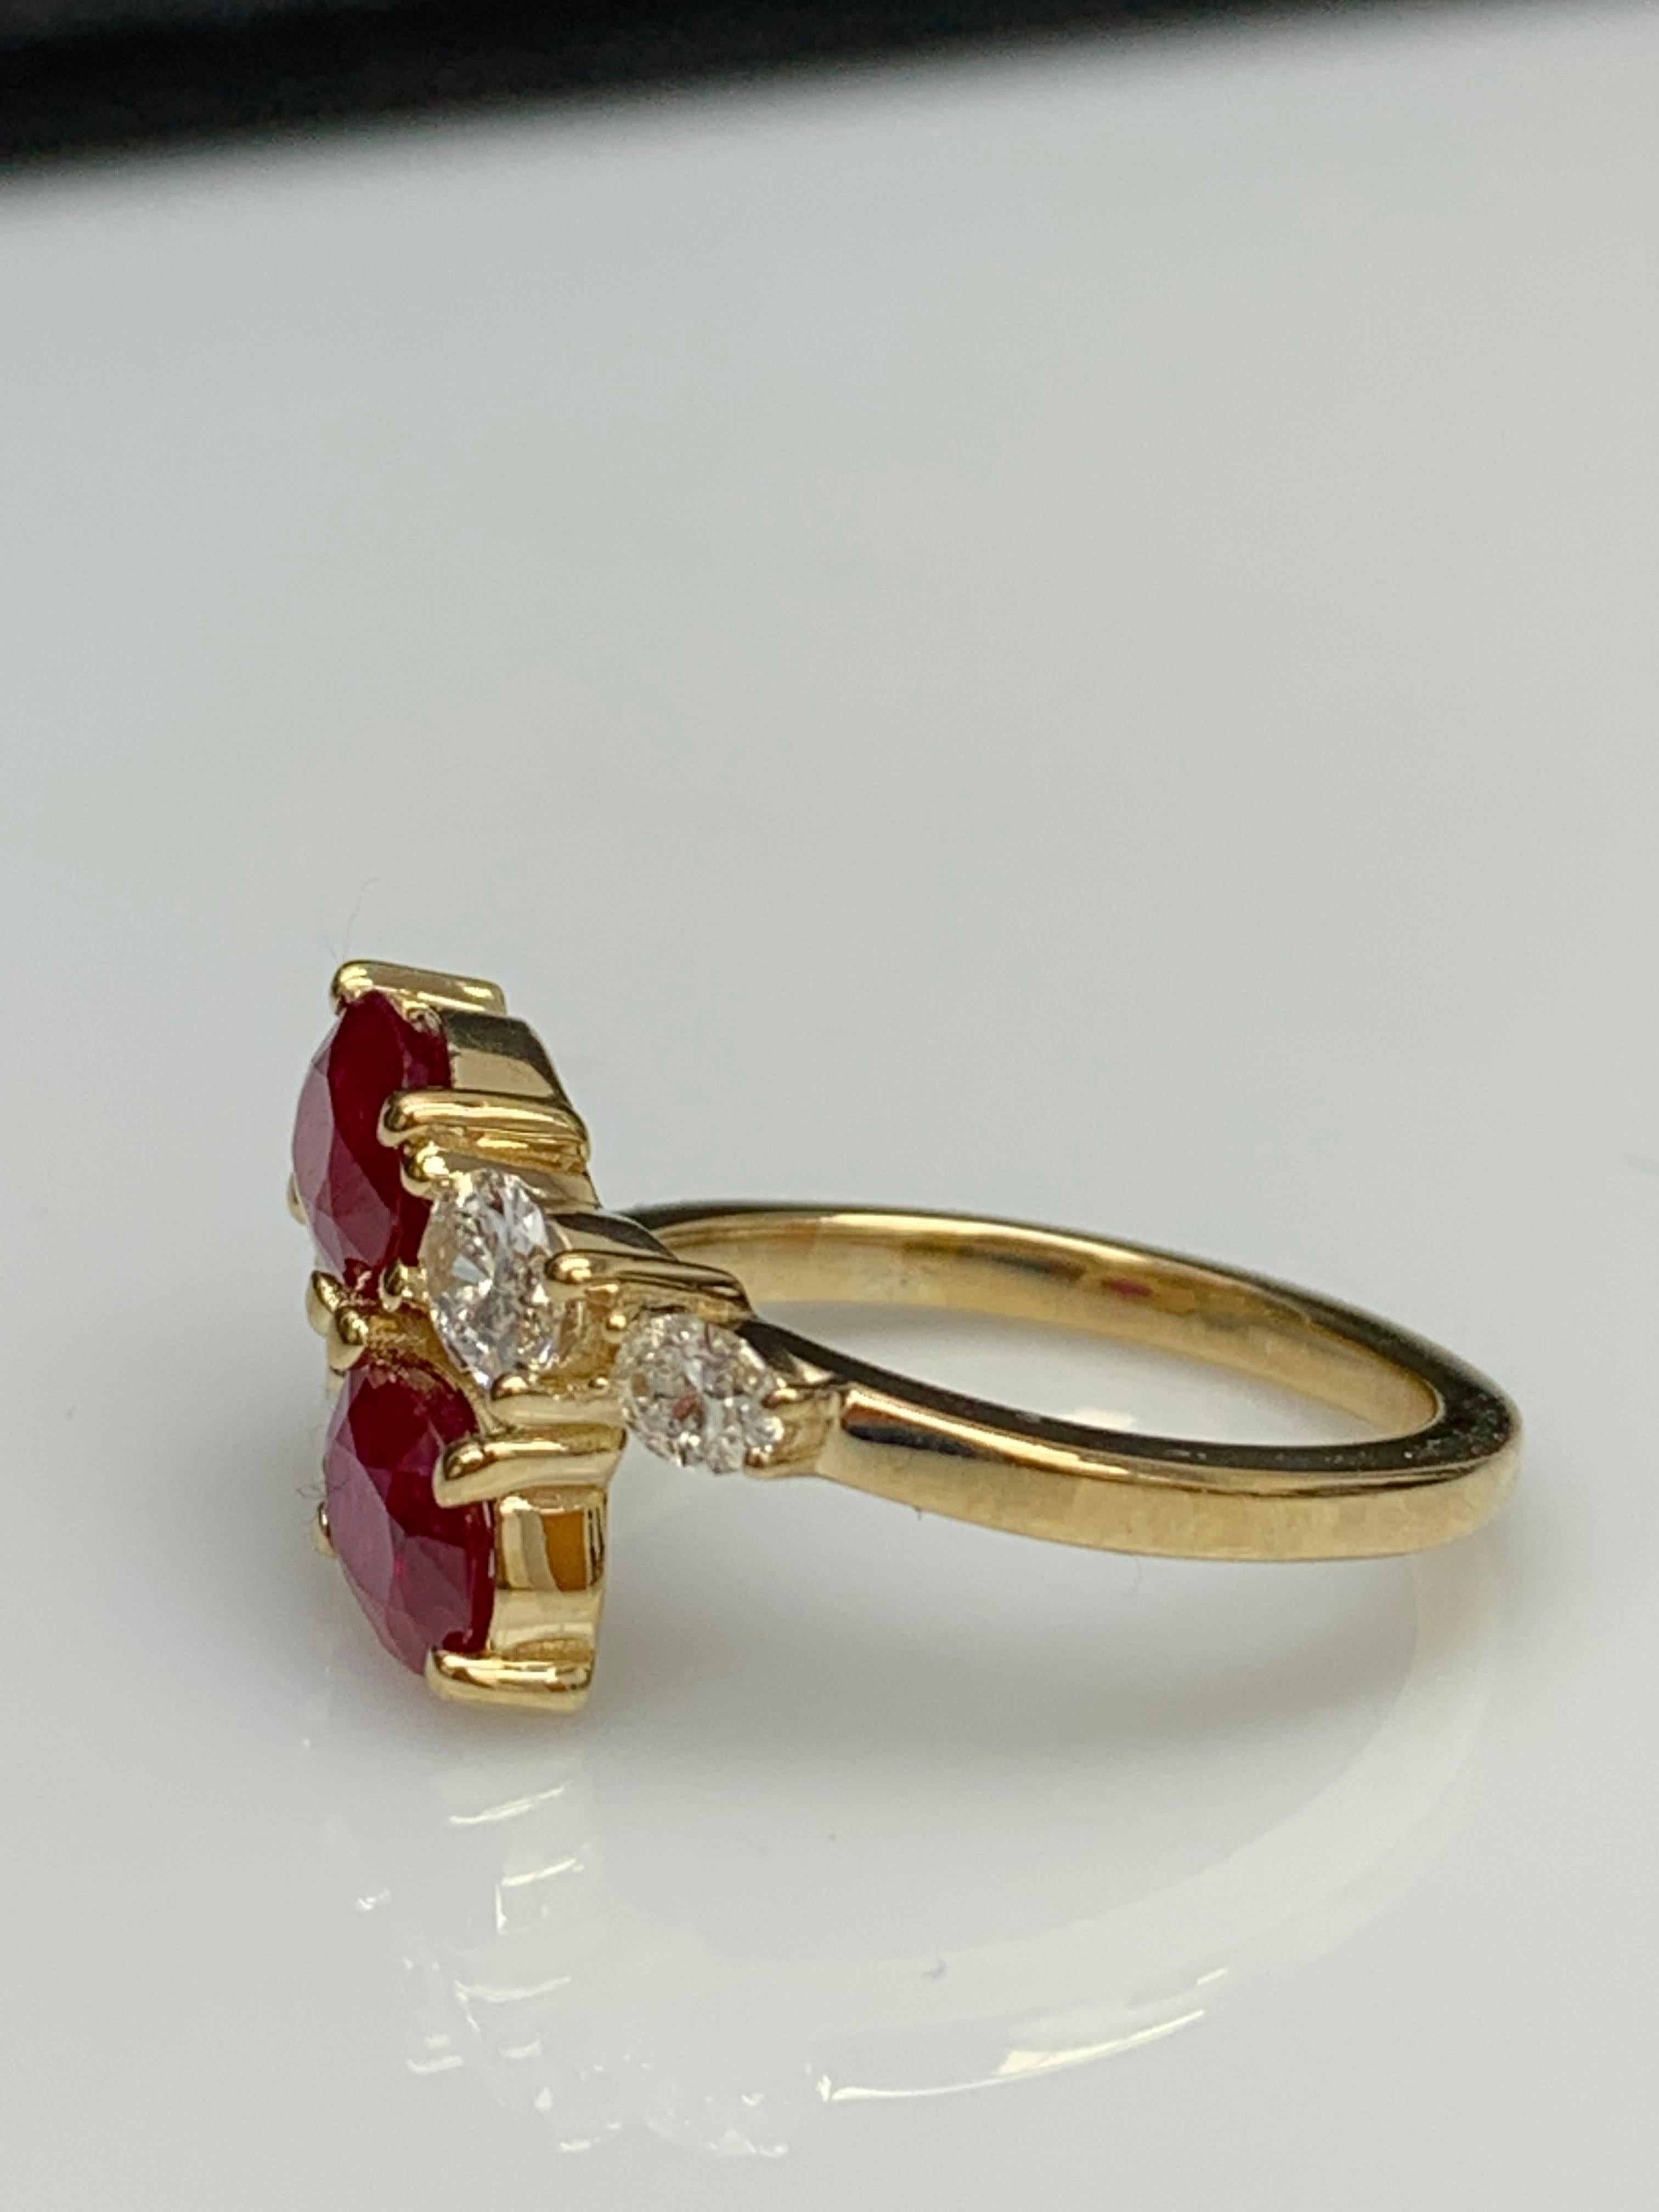 2.18 Carat Oval Cut Ruby Diamond Toi et Moi Engagement Ring in 14K Yellow Gold For Sale 8